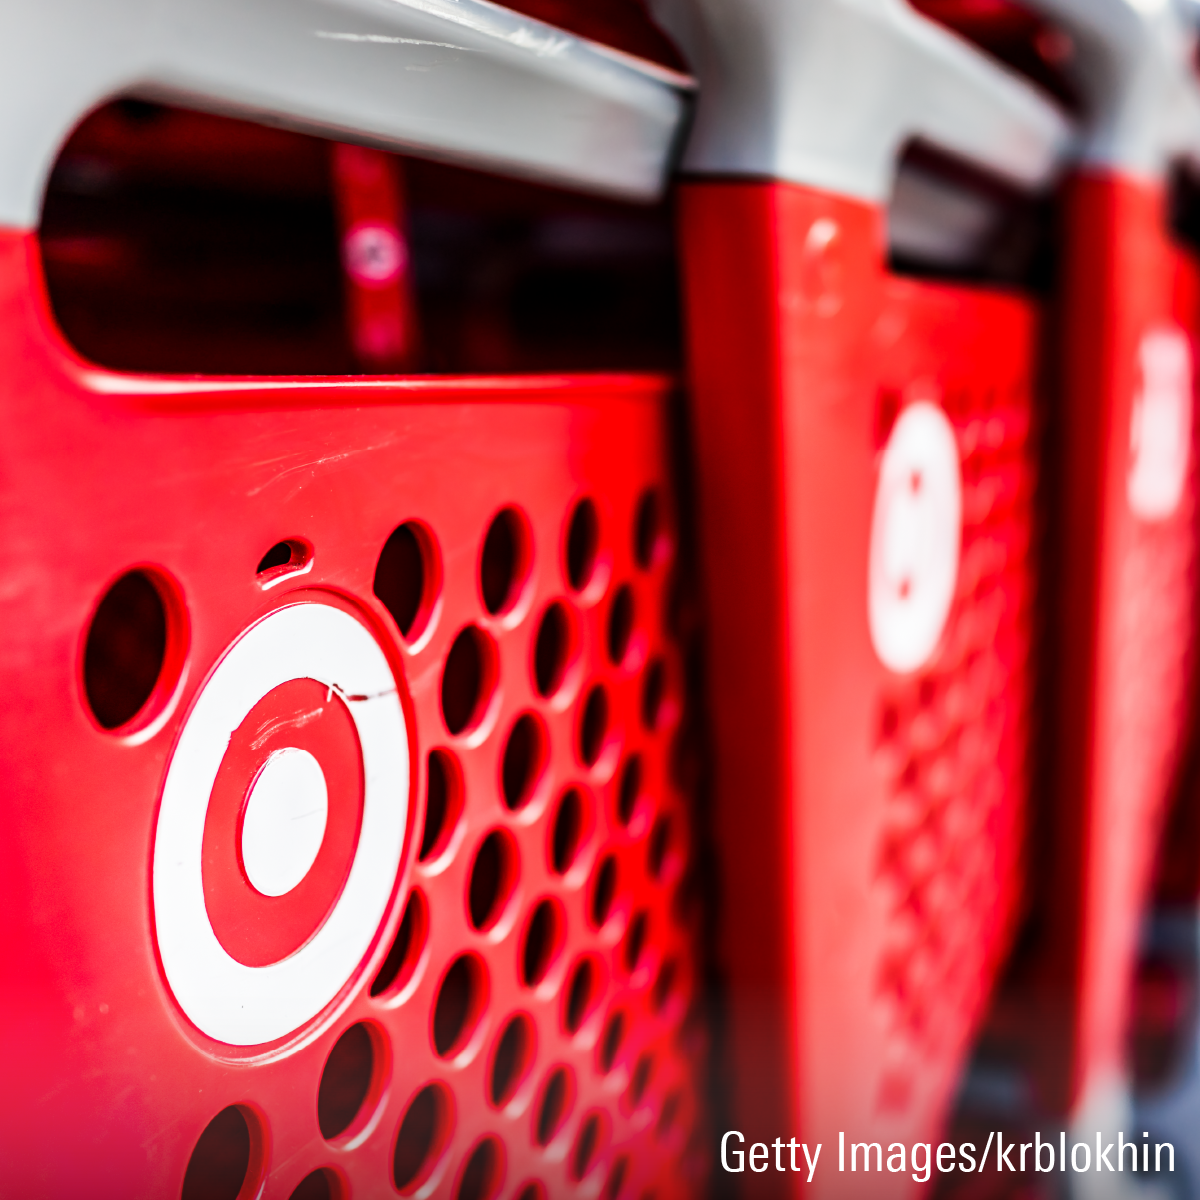 After Earnings, Is Target Stock a Buy, Sell, or Fairly Valued?